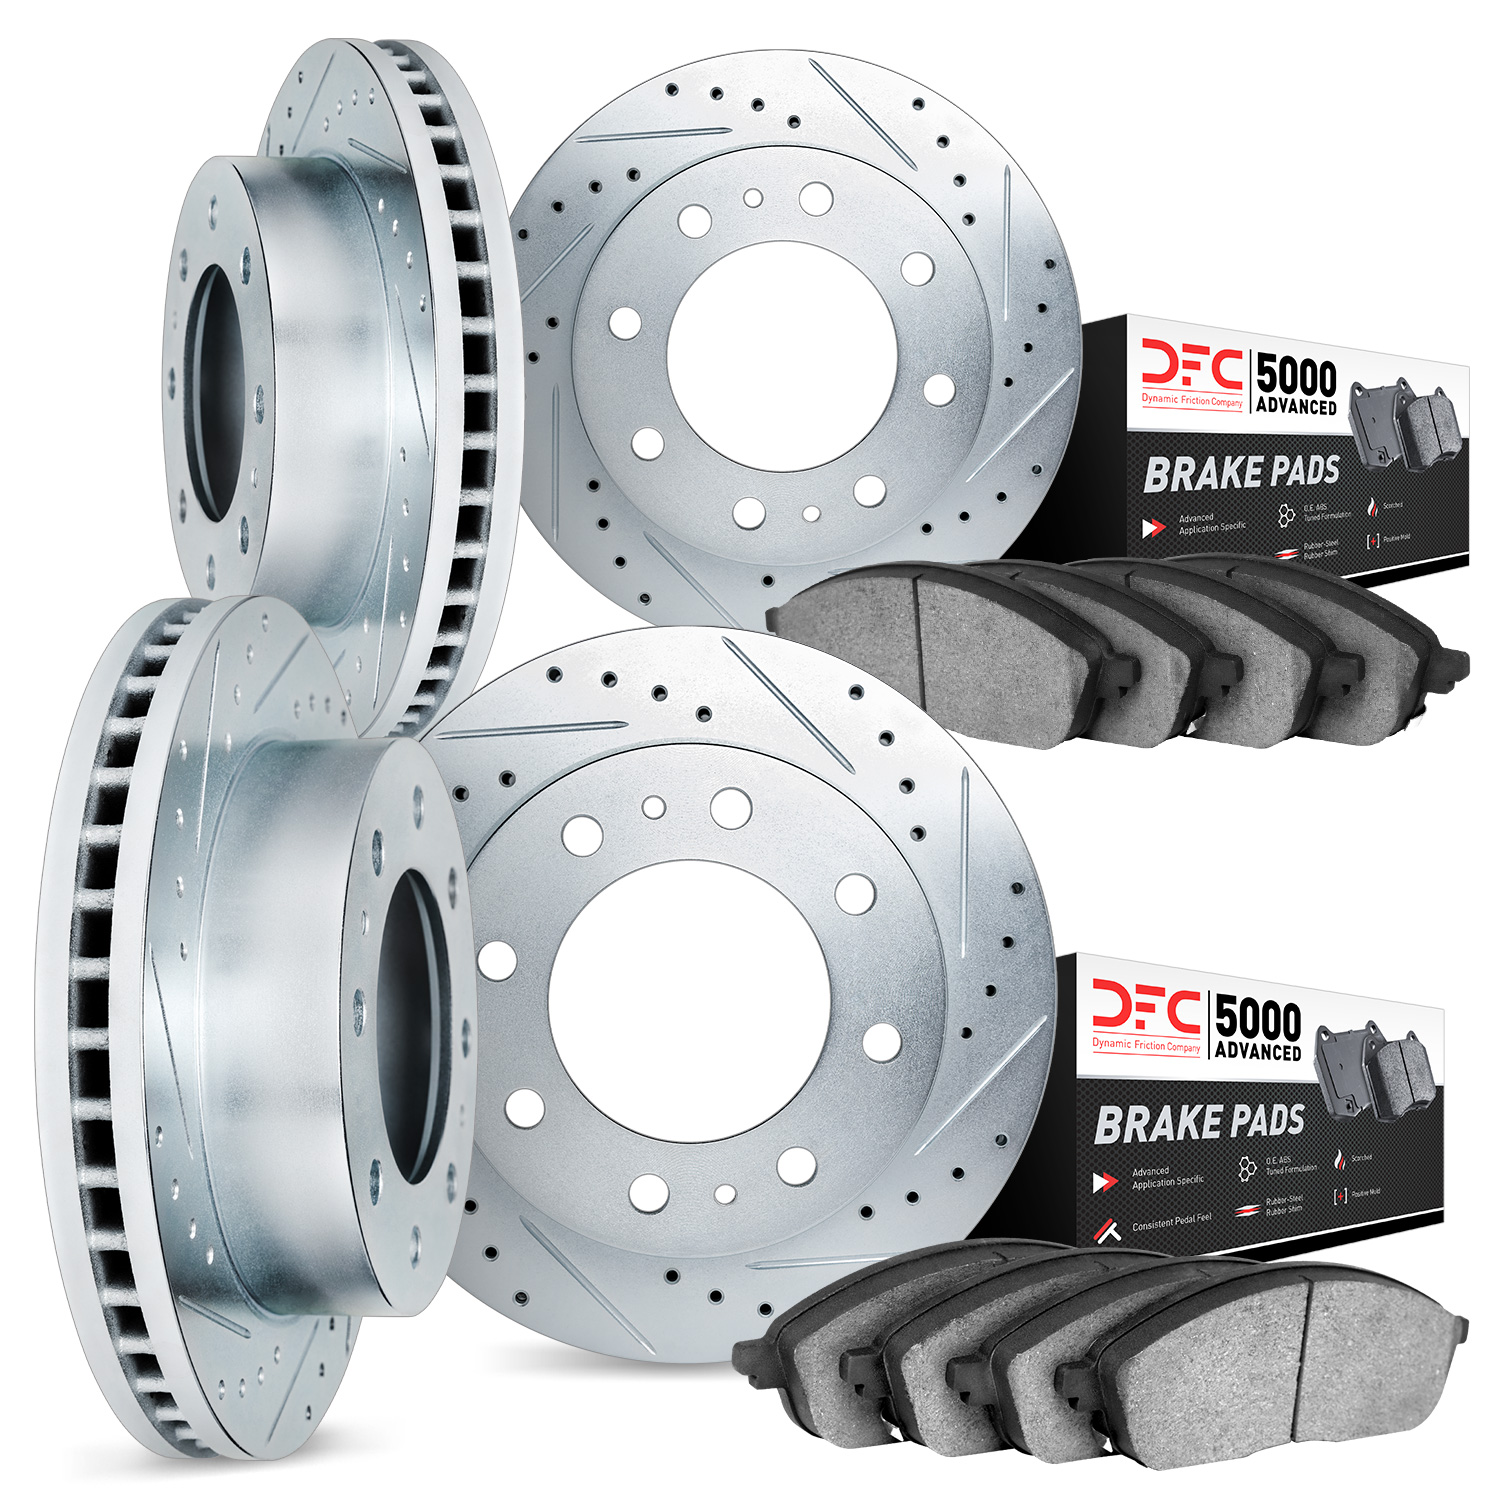 7504-54314 Drilled/Slotted Brake Rotors w/5000 Advanced Brake Pads Kit [Silver], 1999-2004 Ford/Lincoln/Mercury/Mazda, Position: